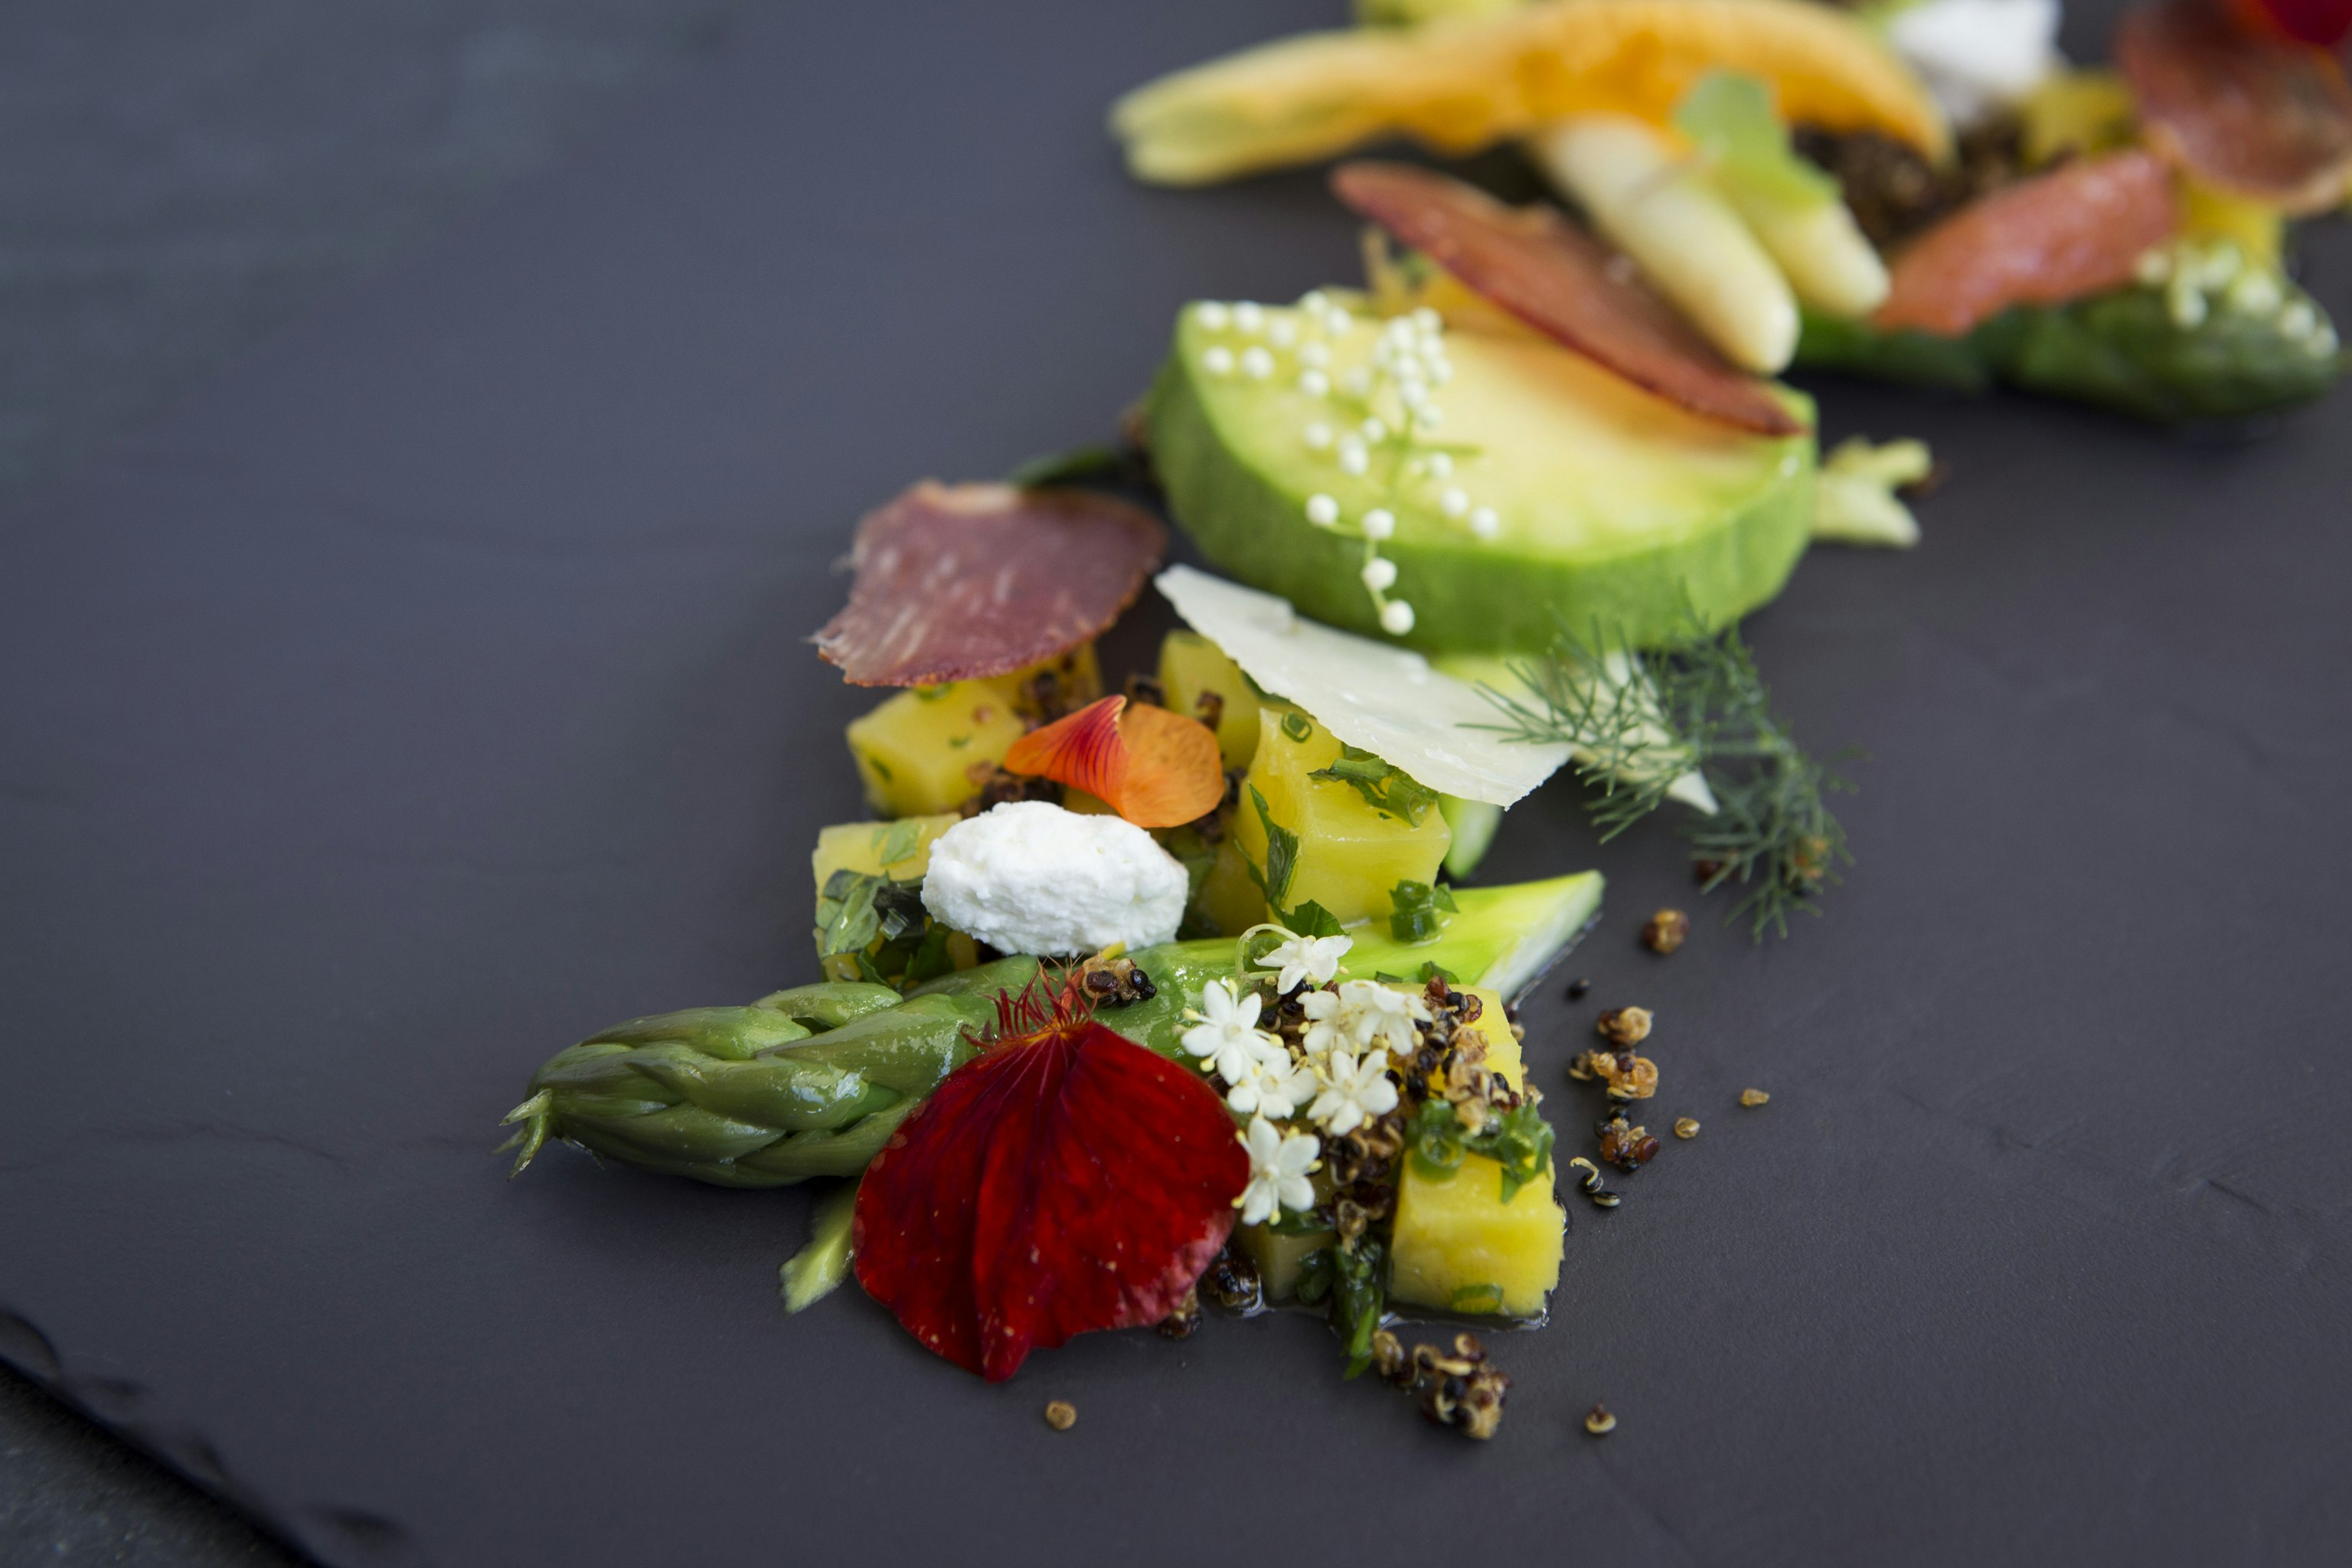 An intricate presentation of colorful vegetables and cured meat on a gray slate.